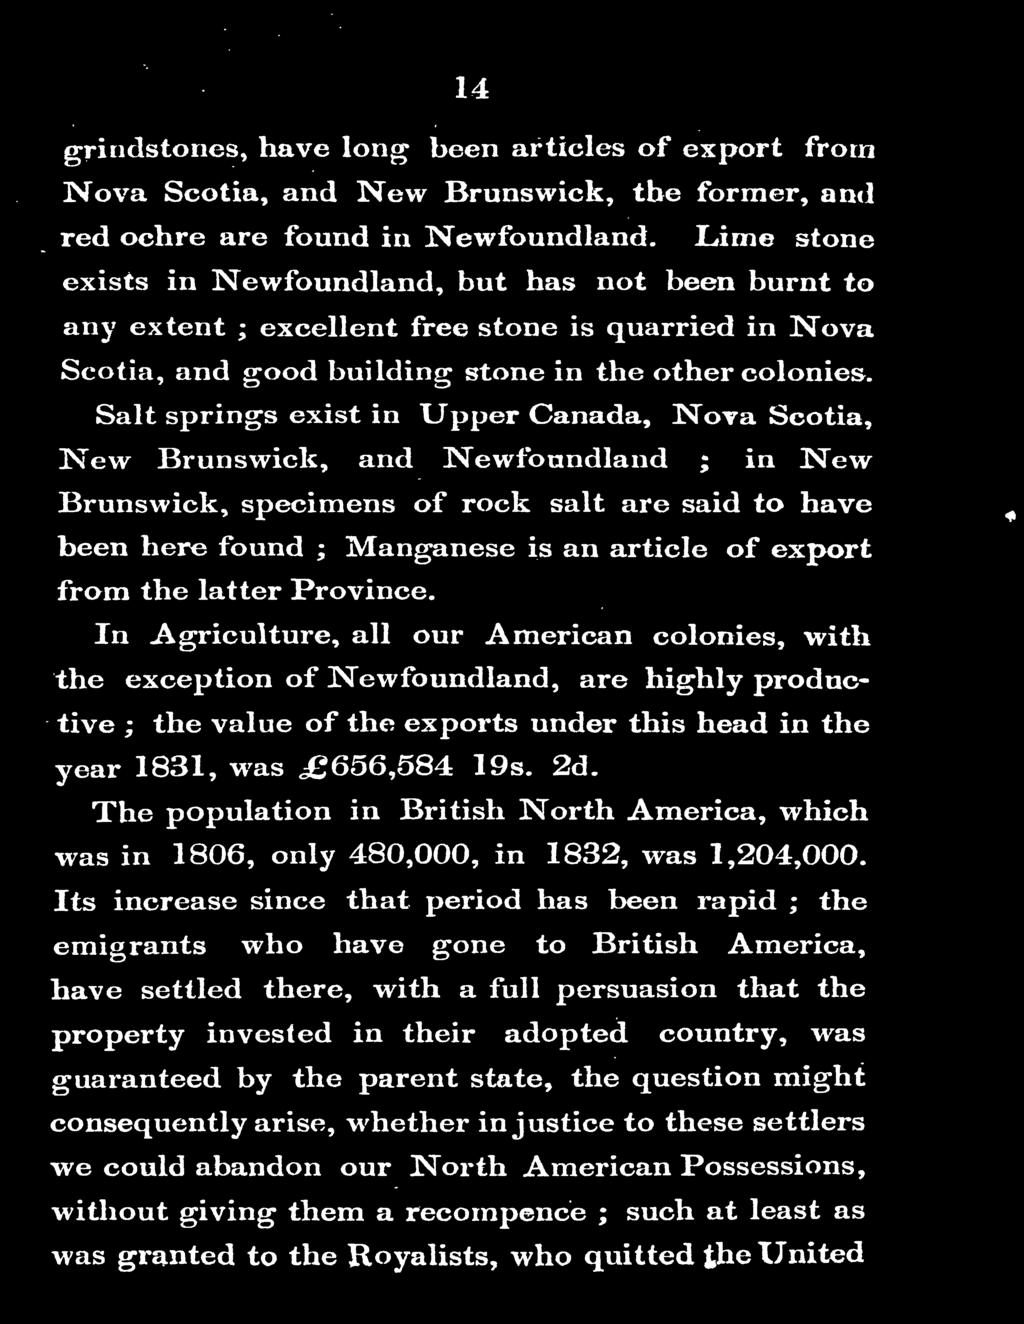 .. ~griculture, all our American colonies, witl1 the exception of Newfoundland, are highly produc- ~ -< -tive; the value of the exports under this head in the )rear 1831, was 656,584 19s. 2d.